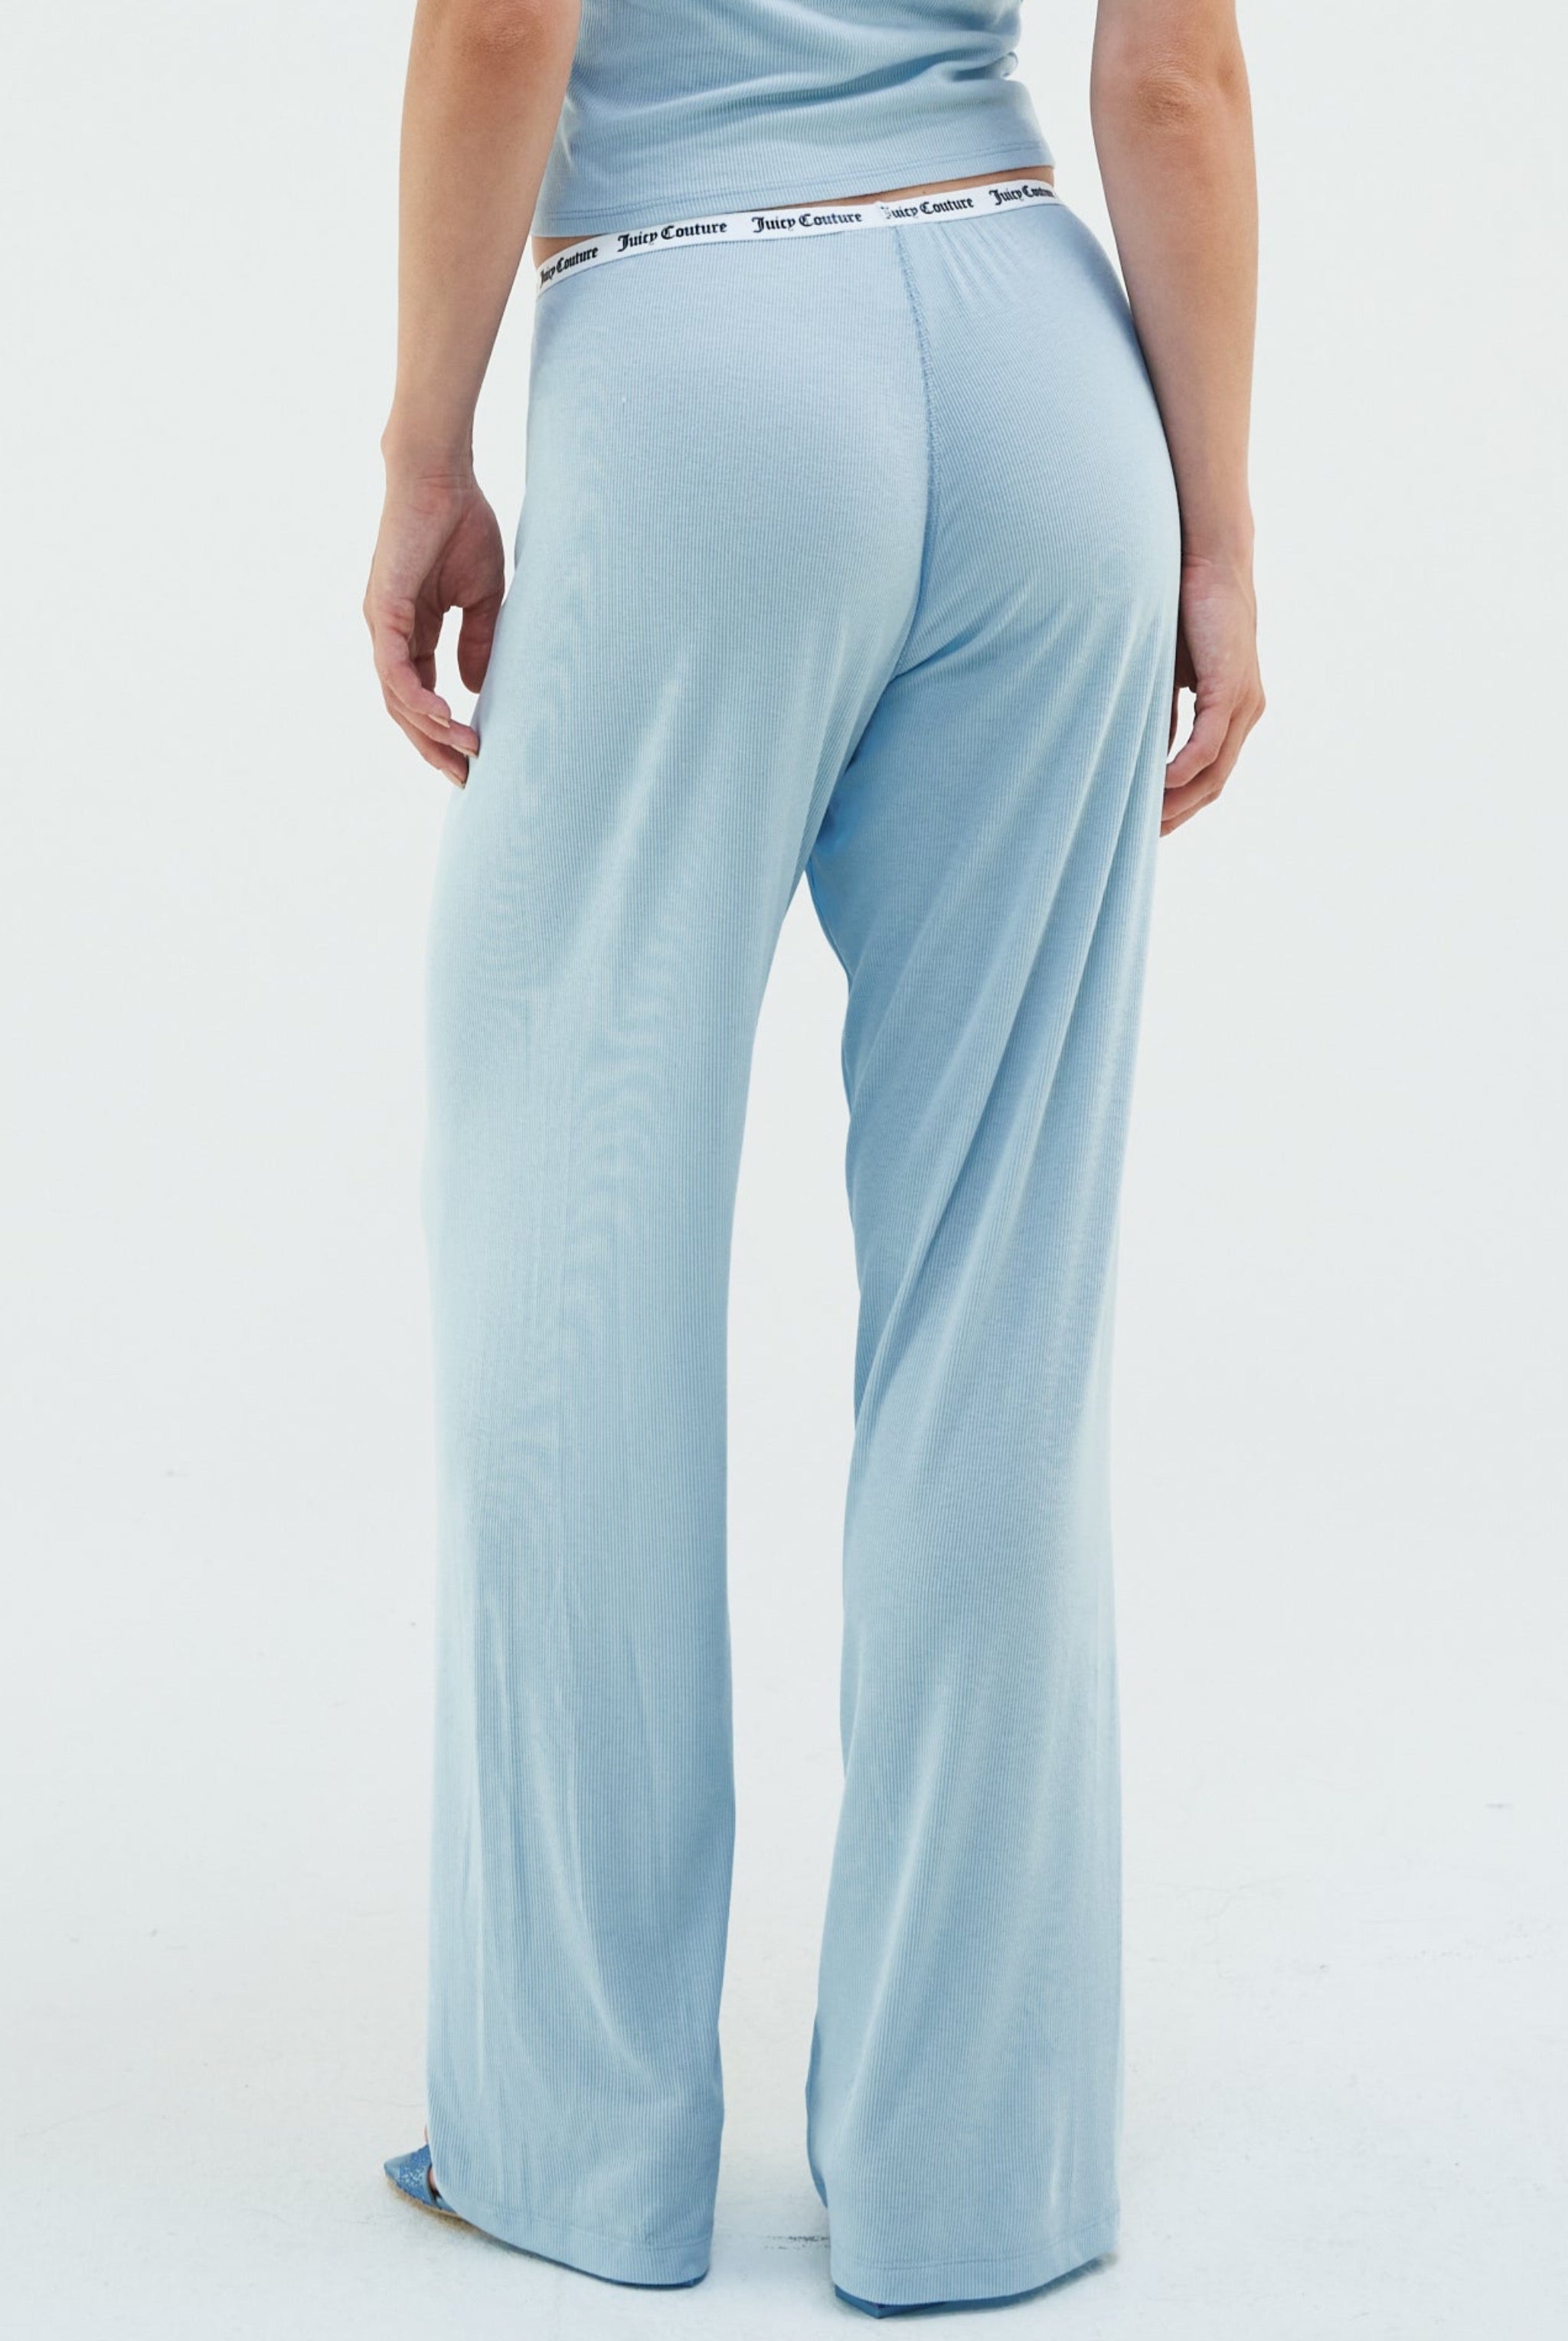 Juicy Couture Lounge Pants